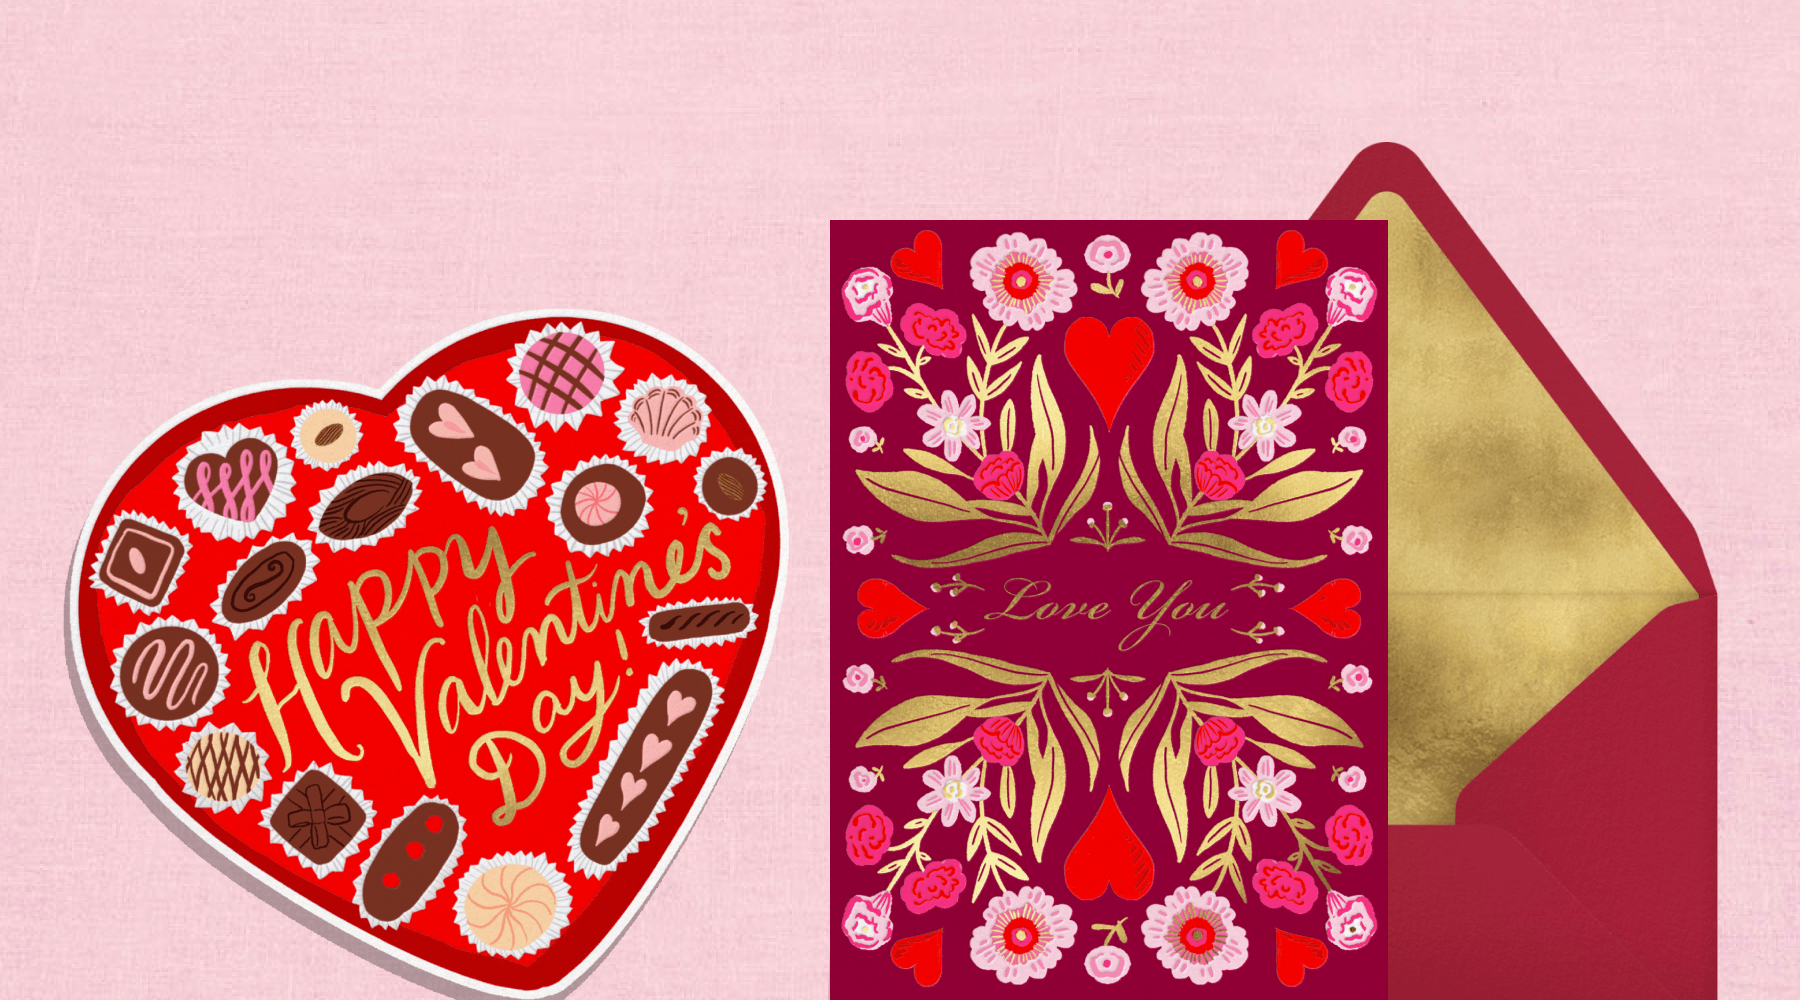 A Valentine’s Day card that looks like a heart-shaped box of chocolates; a maroon card with a mirrored illustration of flowers and hearts.